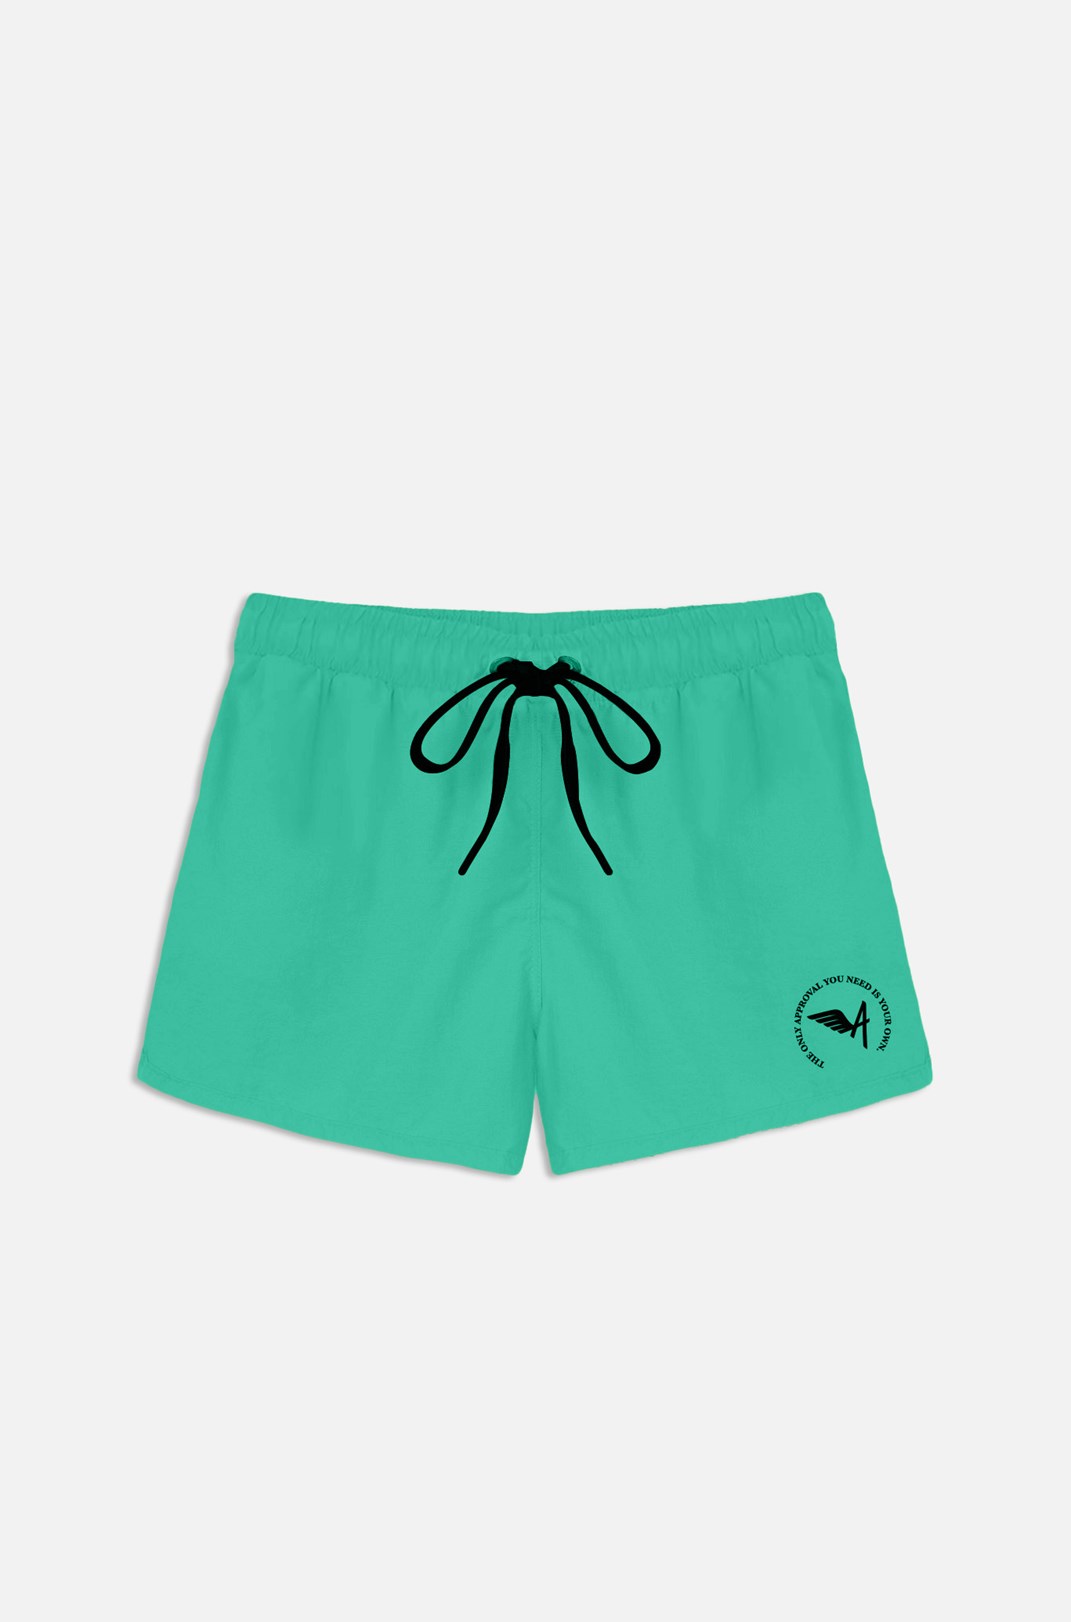 Shorts Approve Wings Verde Água